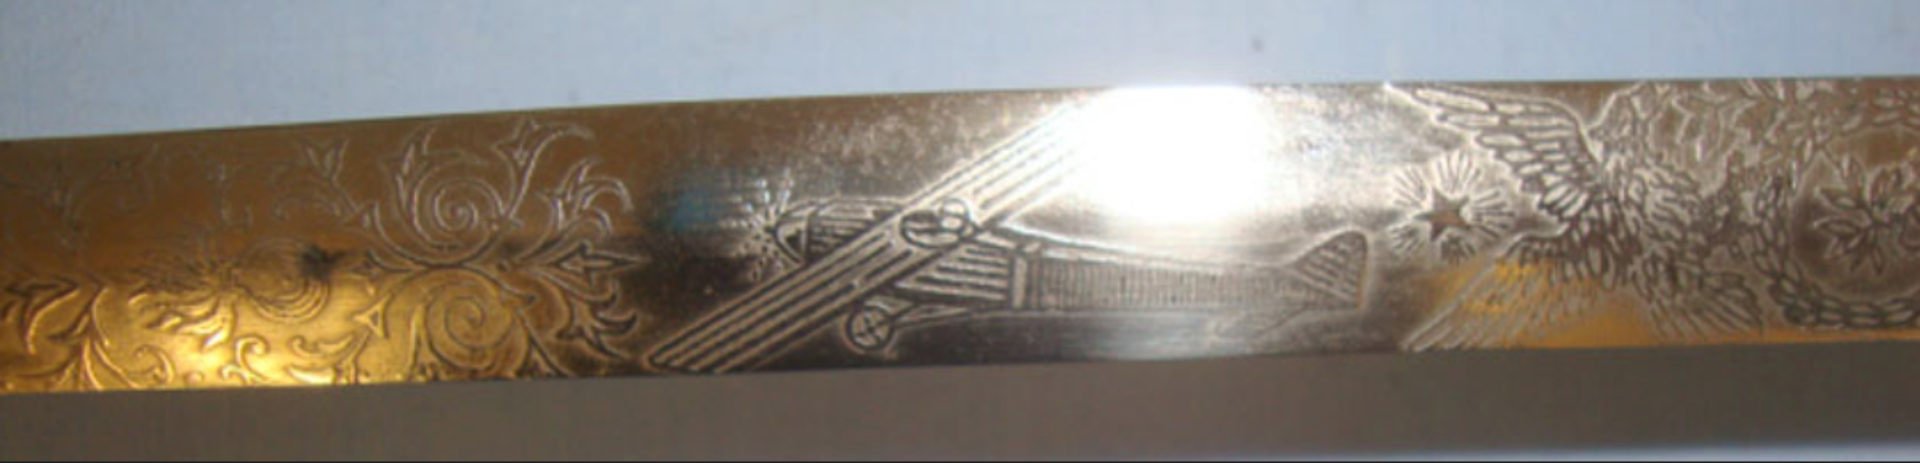 1930's/ WW2 Era Italian Royal Air Force (Regia Aeronautica ) Officer's Dress Sword With Etched Blade - Image 2 of 3